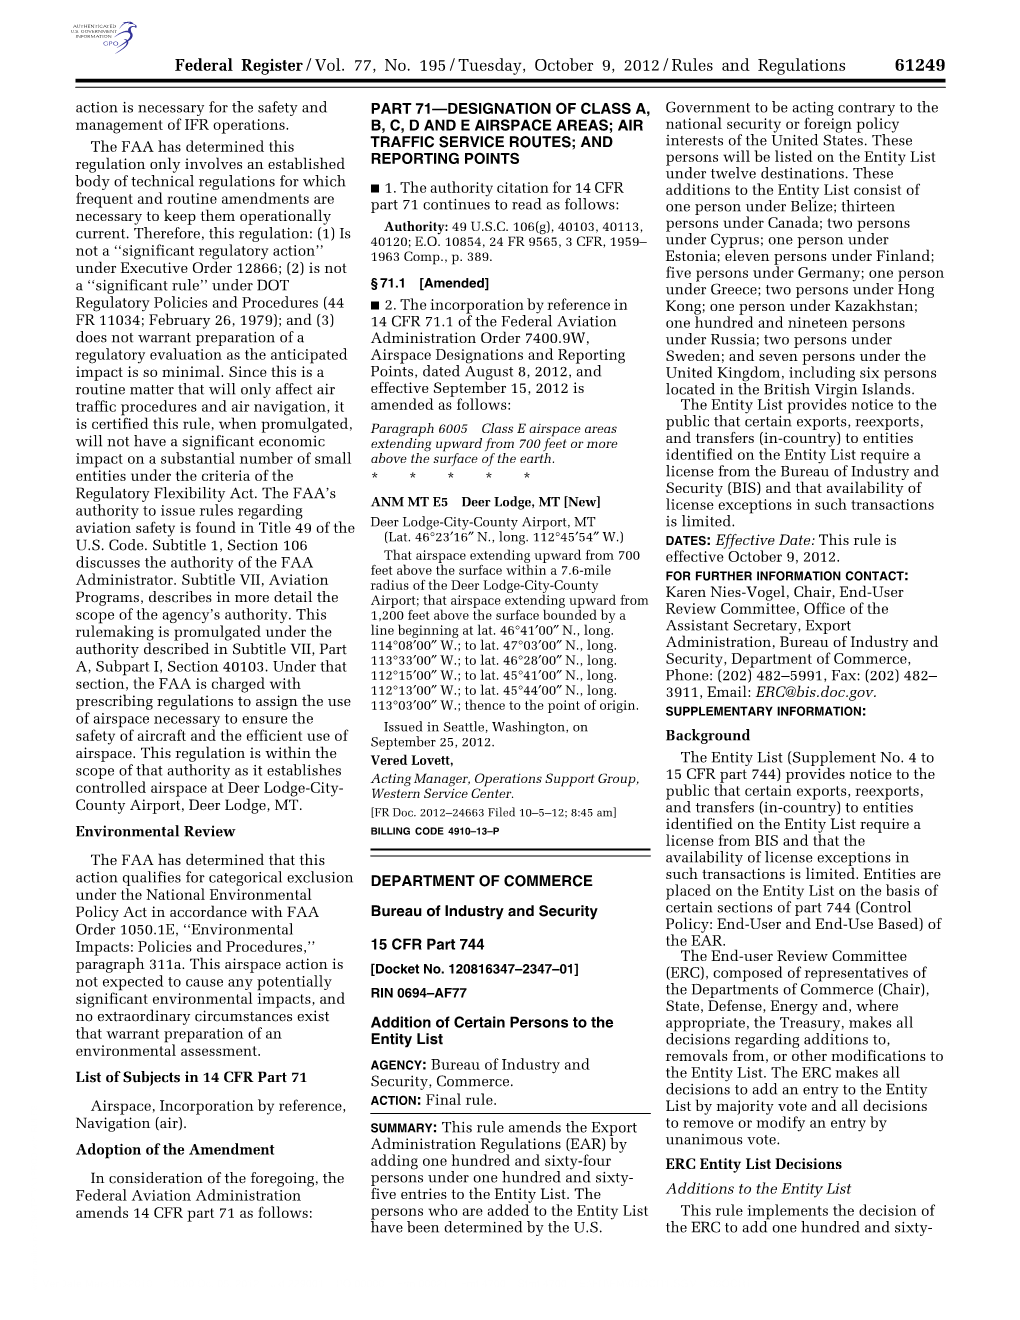 Federal Register/Vol. 77, No. 195/Tuesday, October 9, 2012/Rules and Regulations